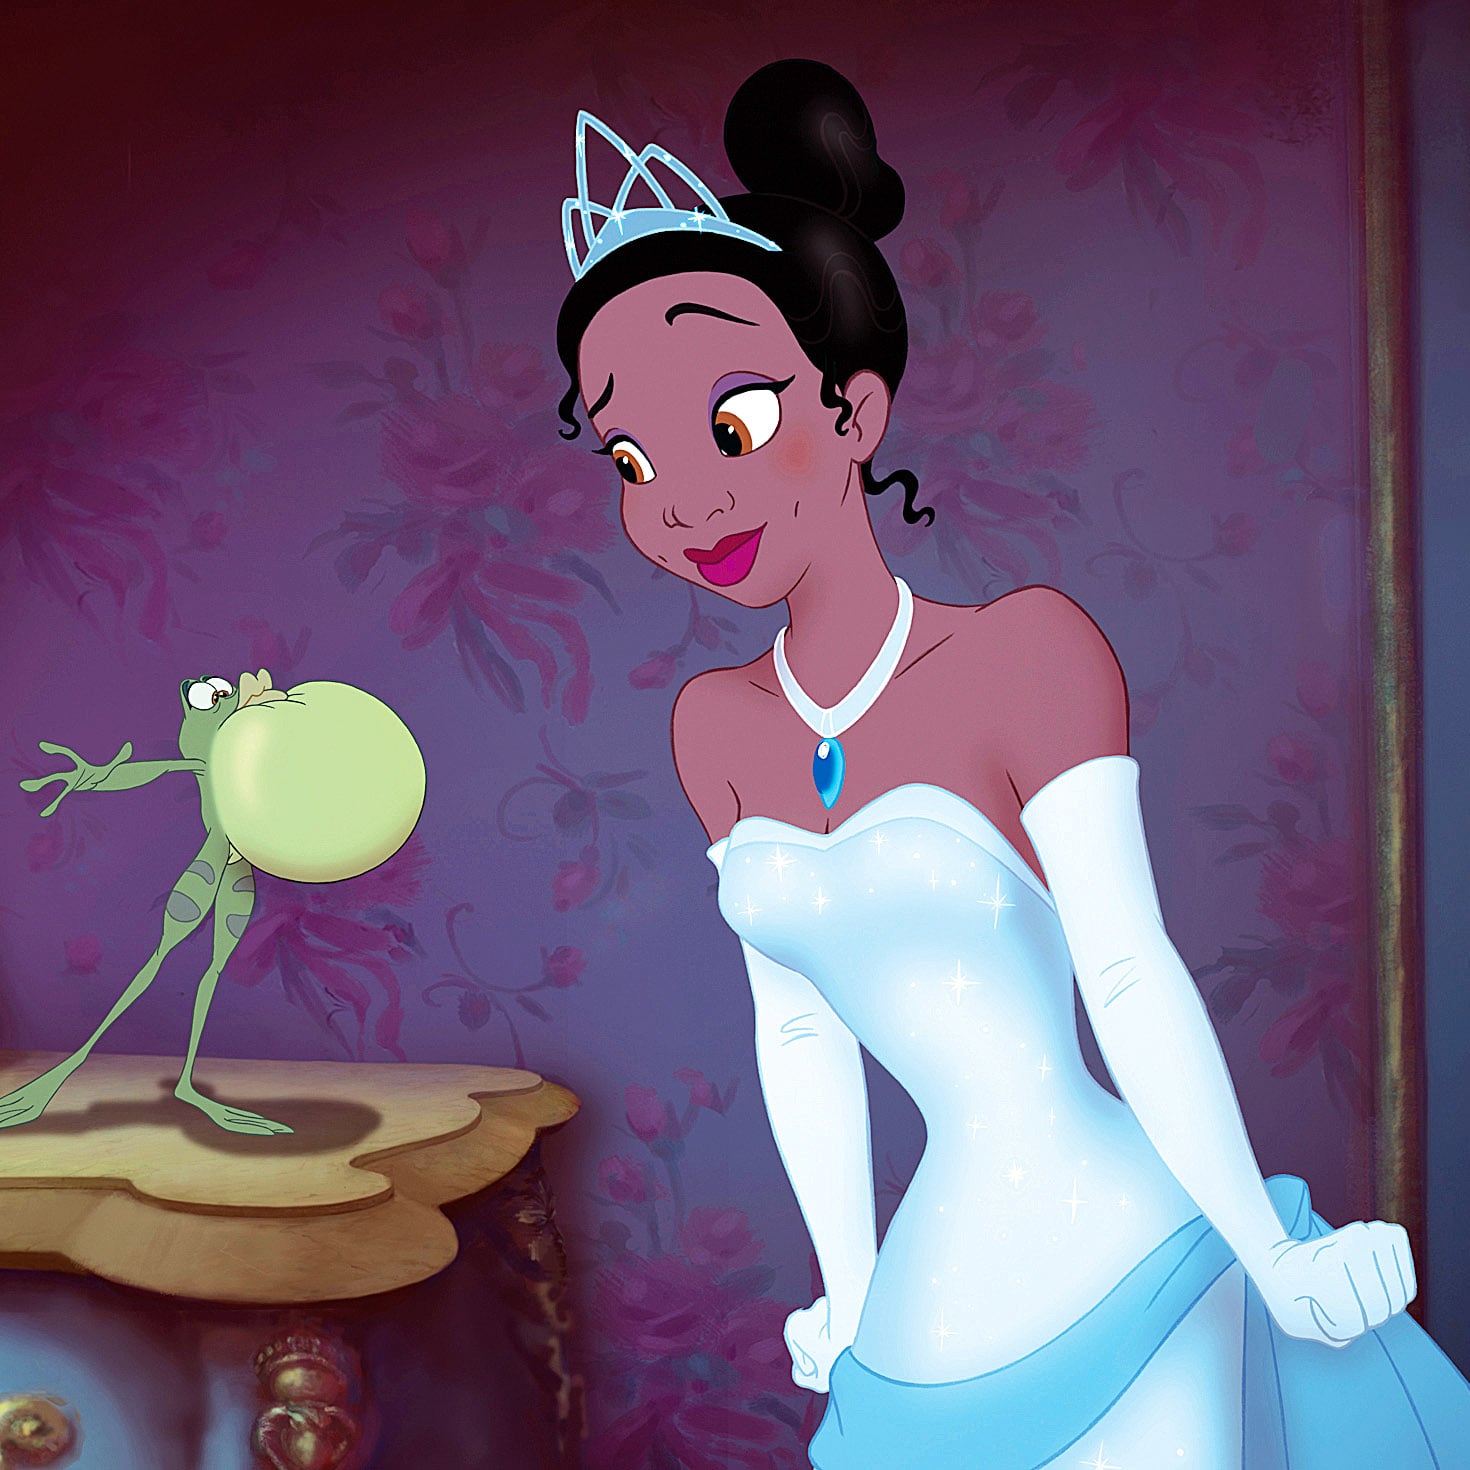 Who Are the Official Disney Princesses in 2020? | POPSUGAR Love & Sex